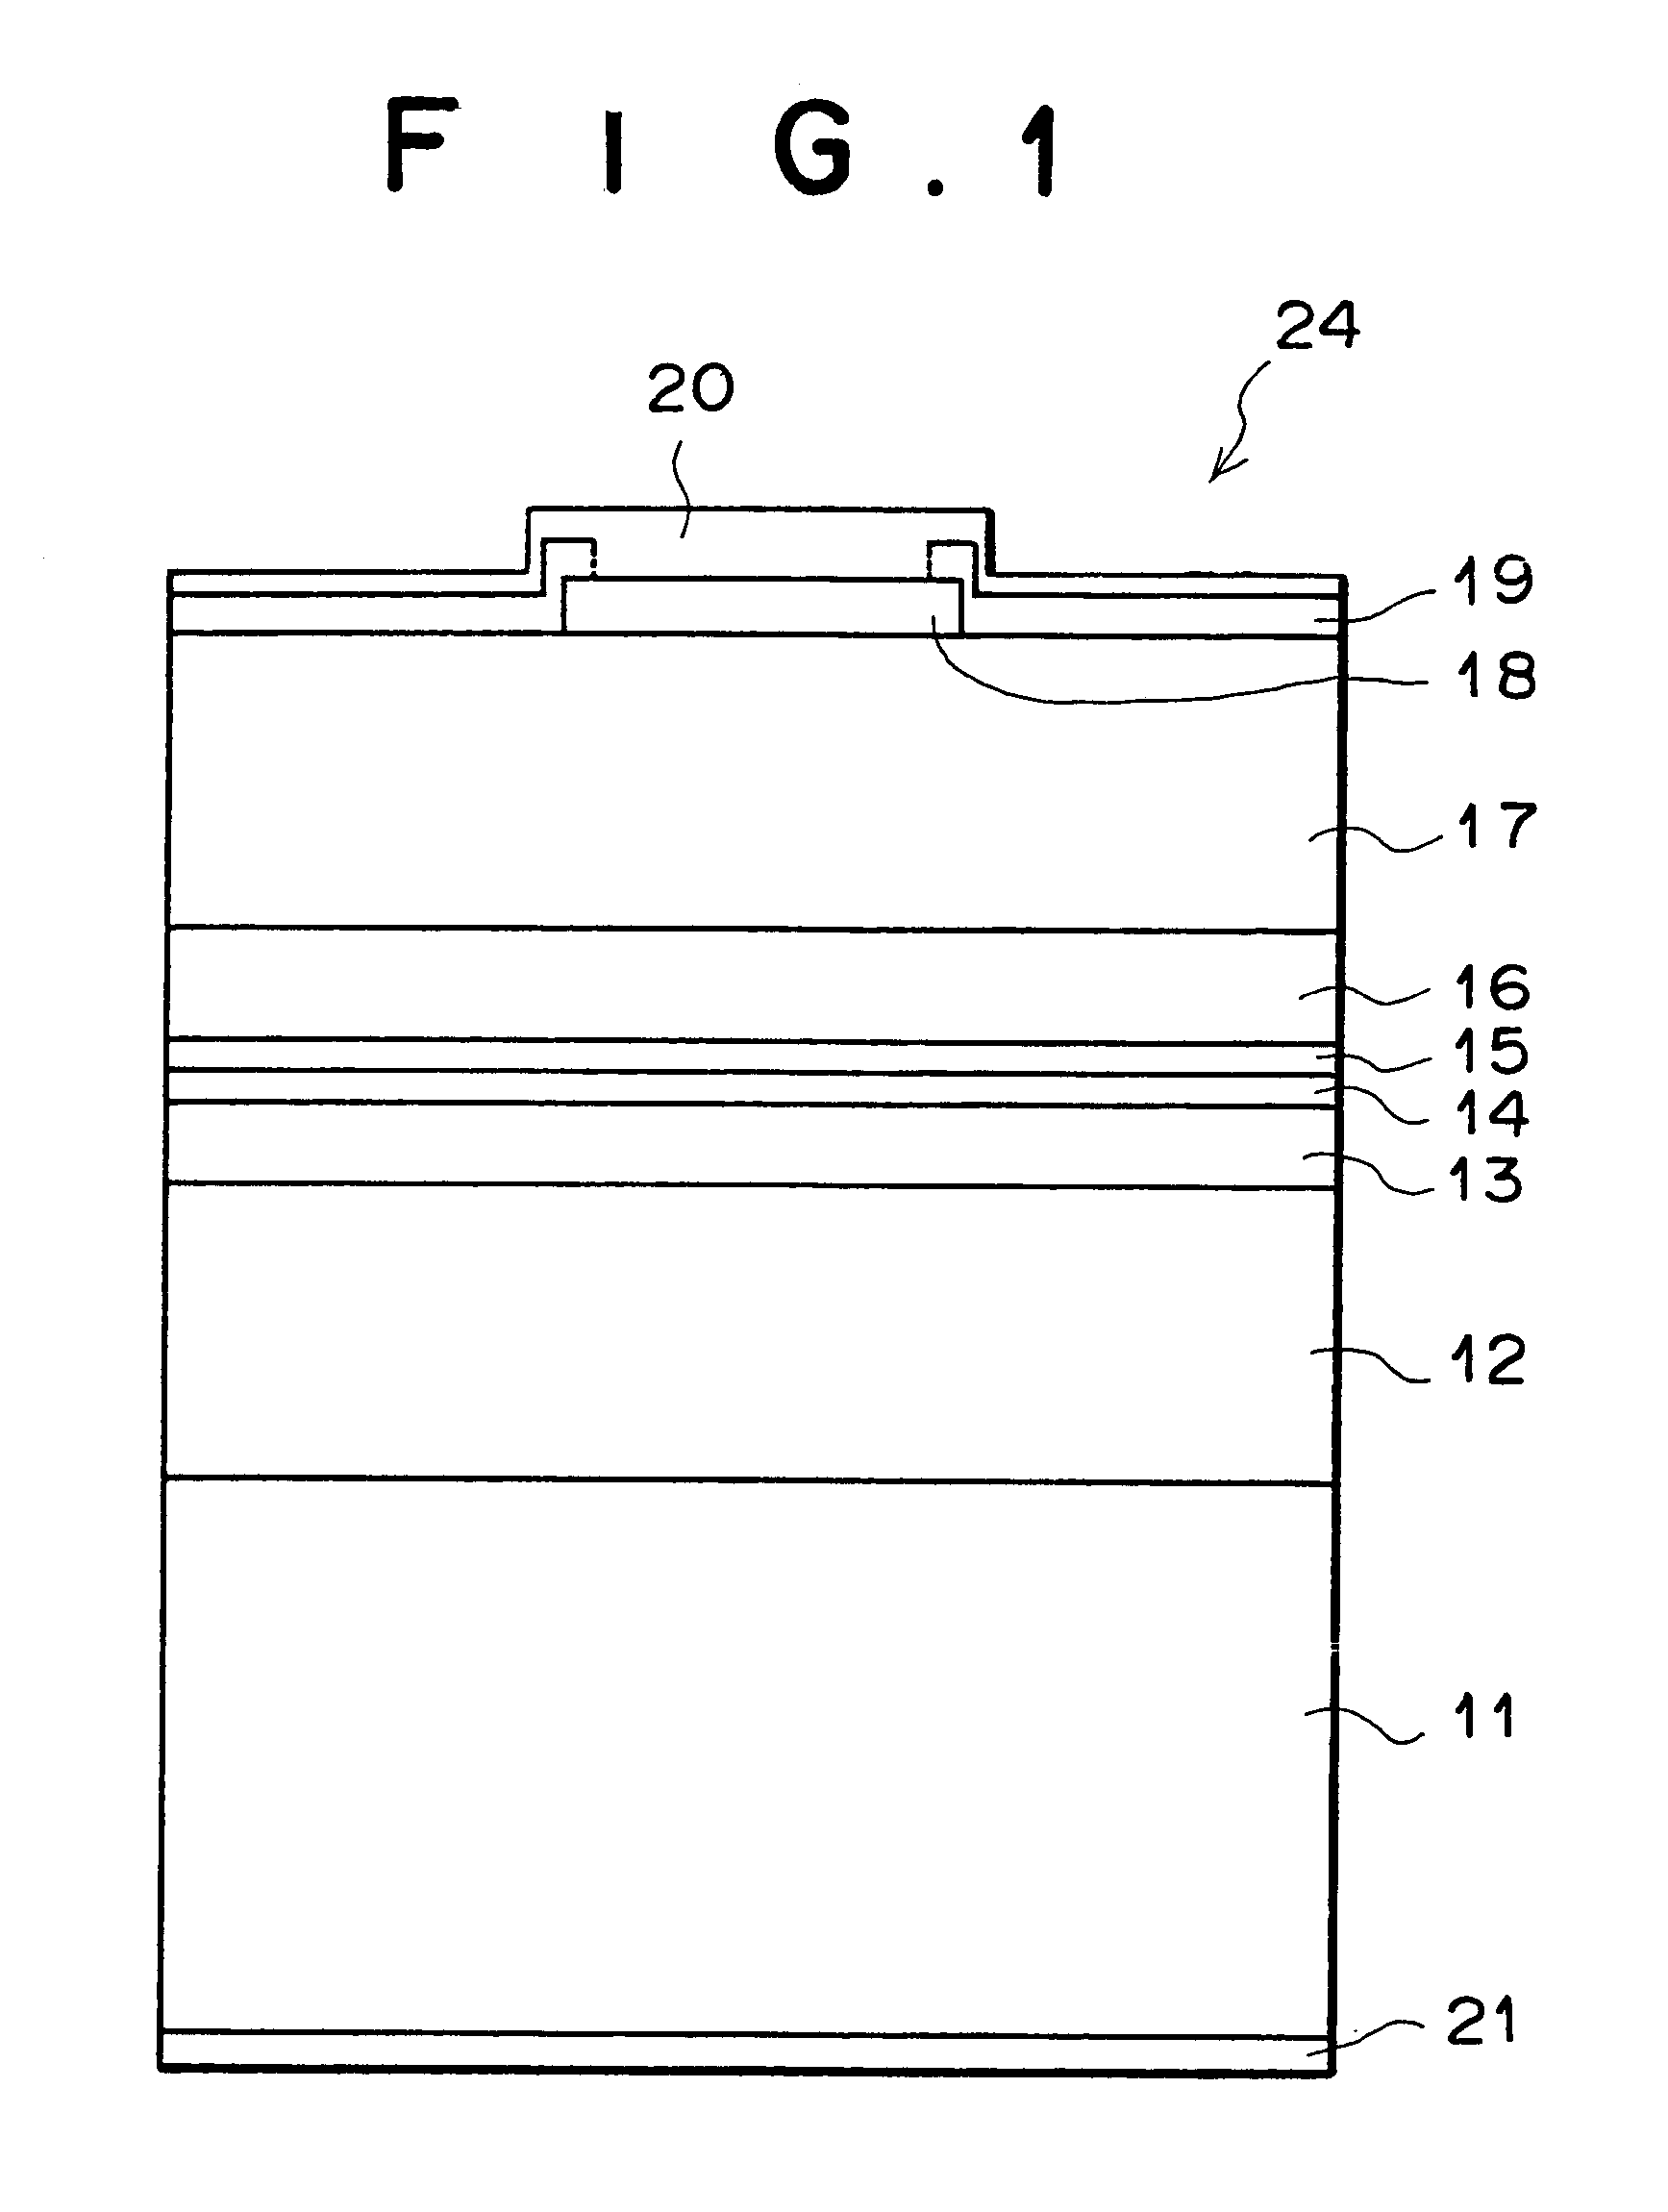 Laser apparatus in which surface-emitting semiconductor is excited with semiconduct laser element and high-order oscillation modes are suppressed